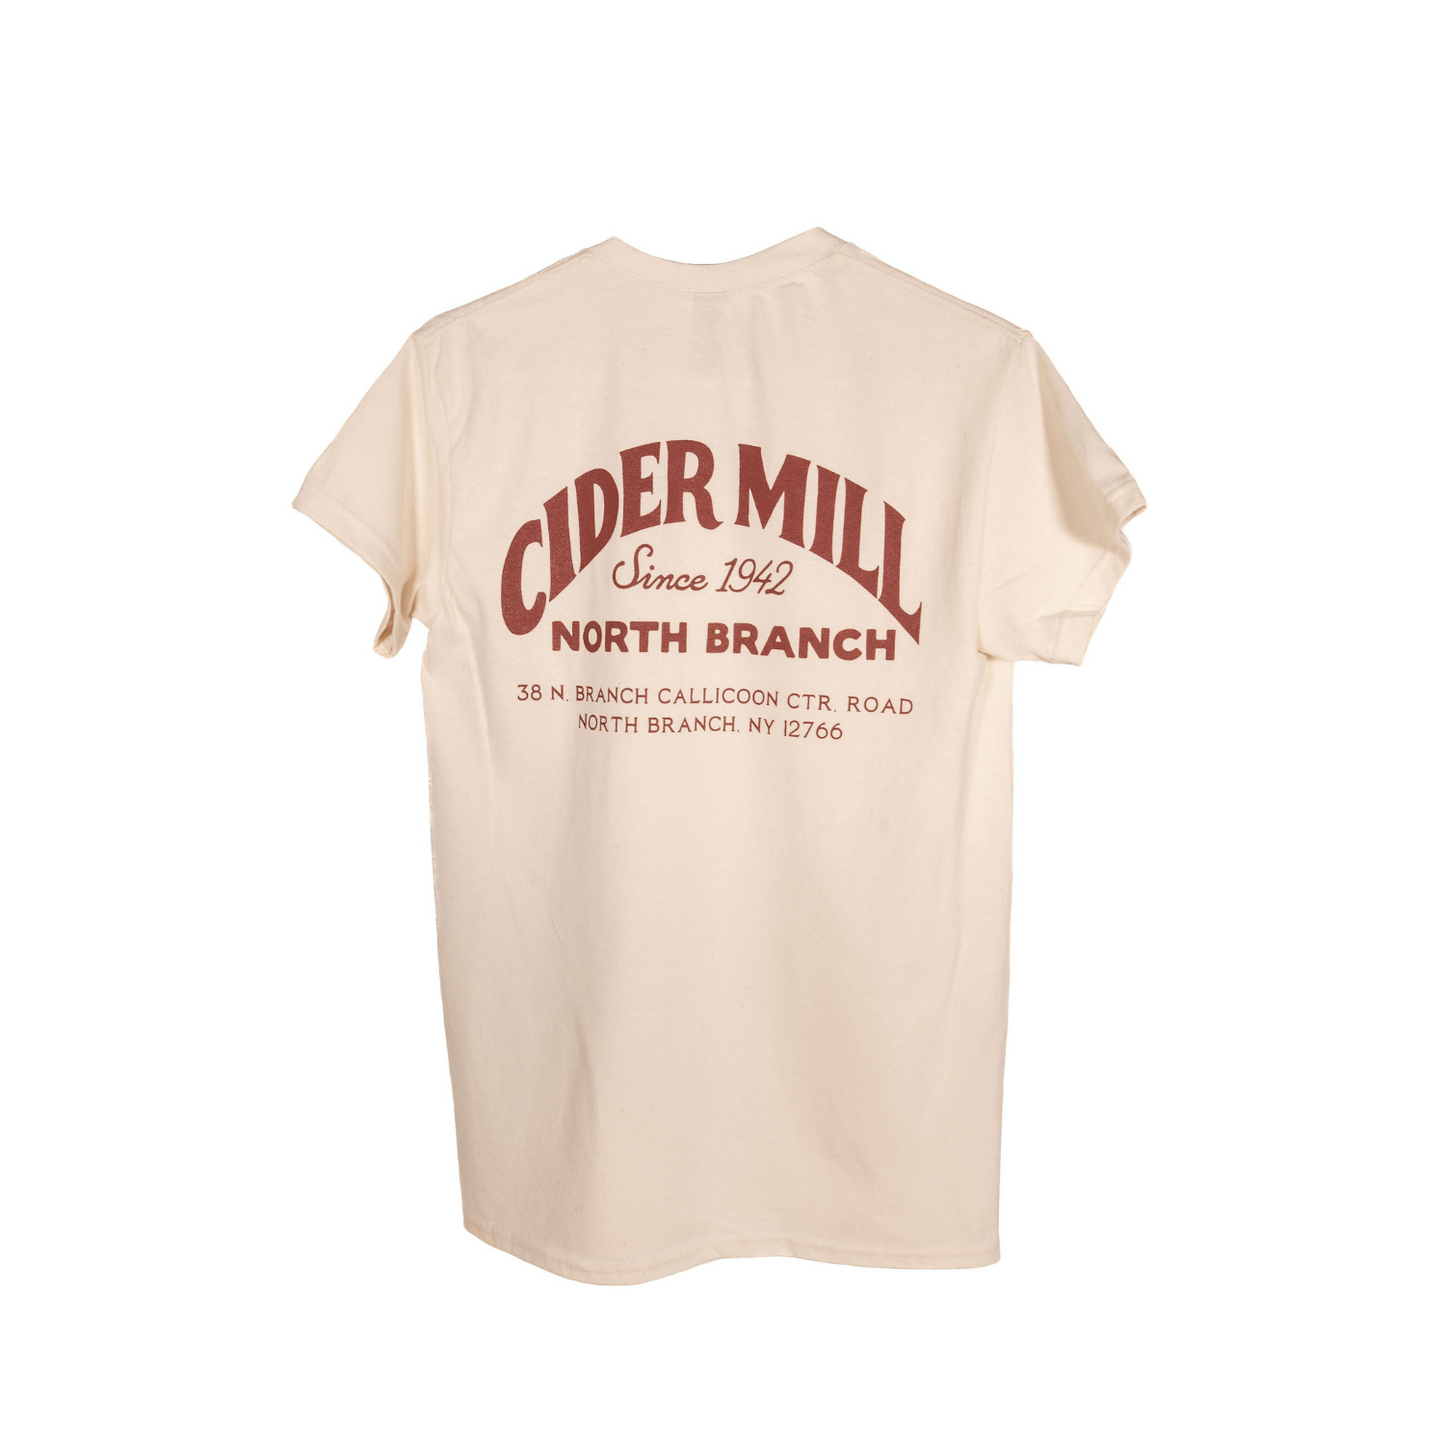 Cider Mill T-Shirt Off White